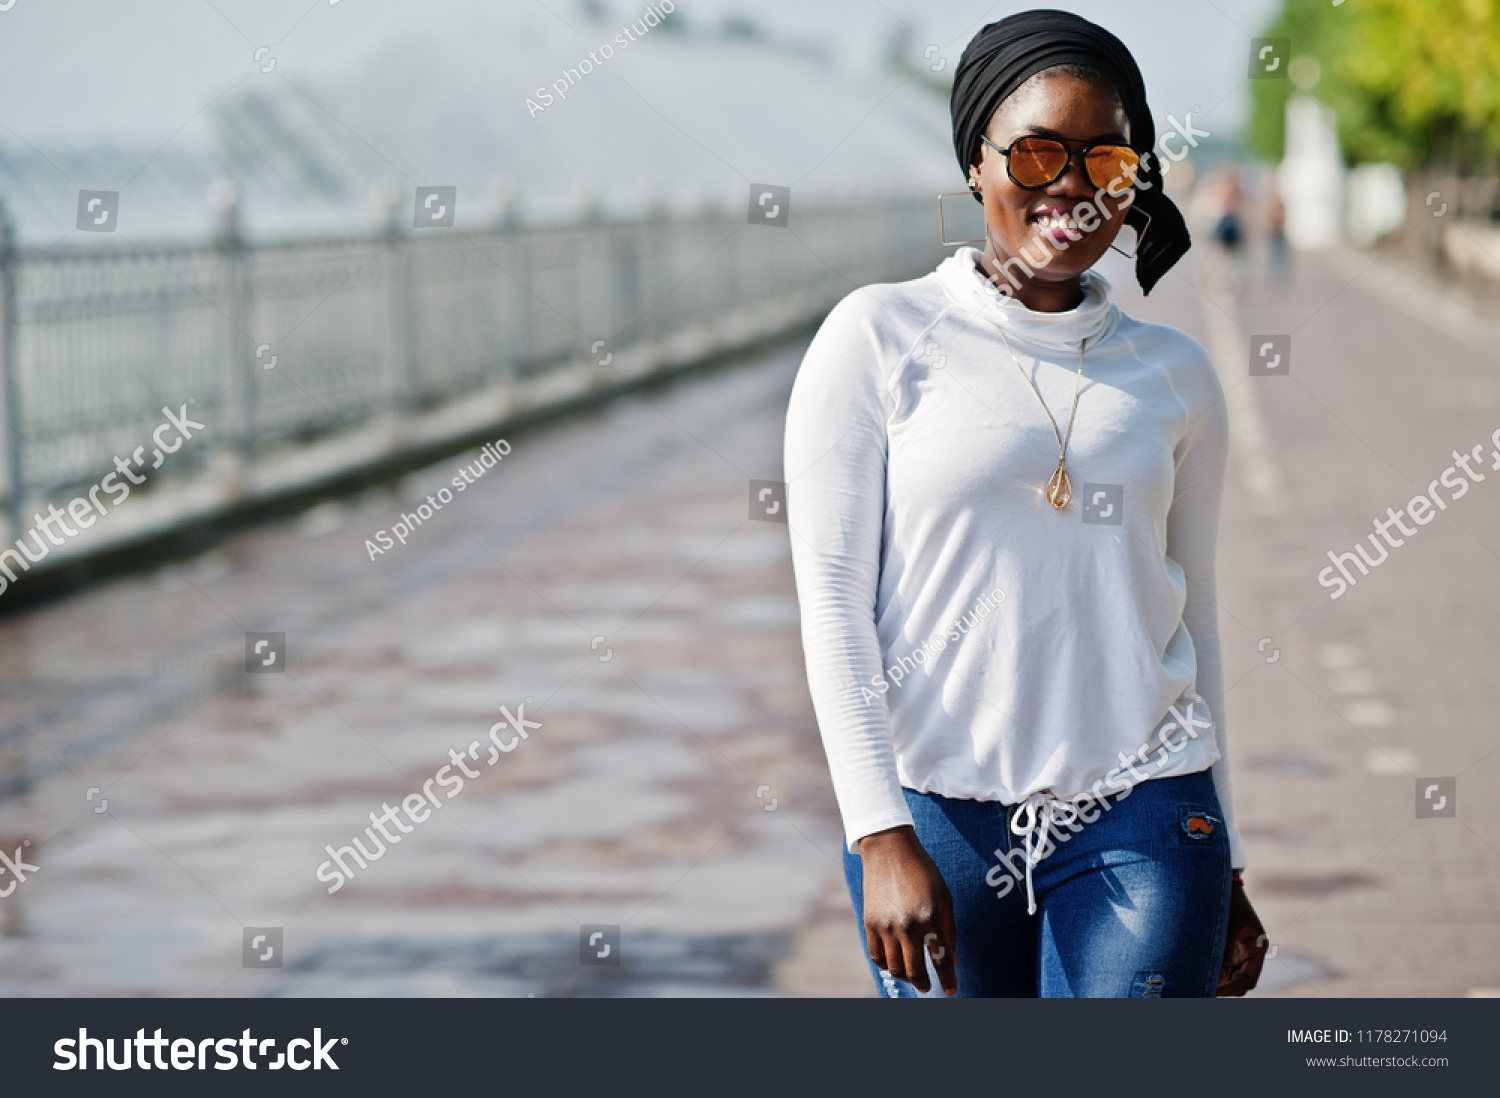 African muslim girl in sunglasses, black hijab, white sweatshirt and jeans posed outdoor against fountain. #1178271094